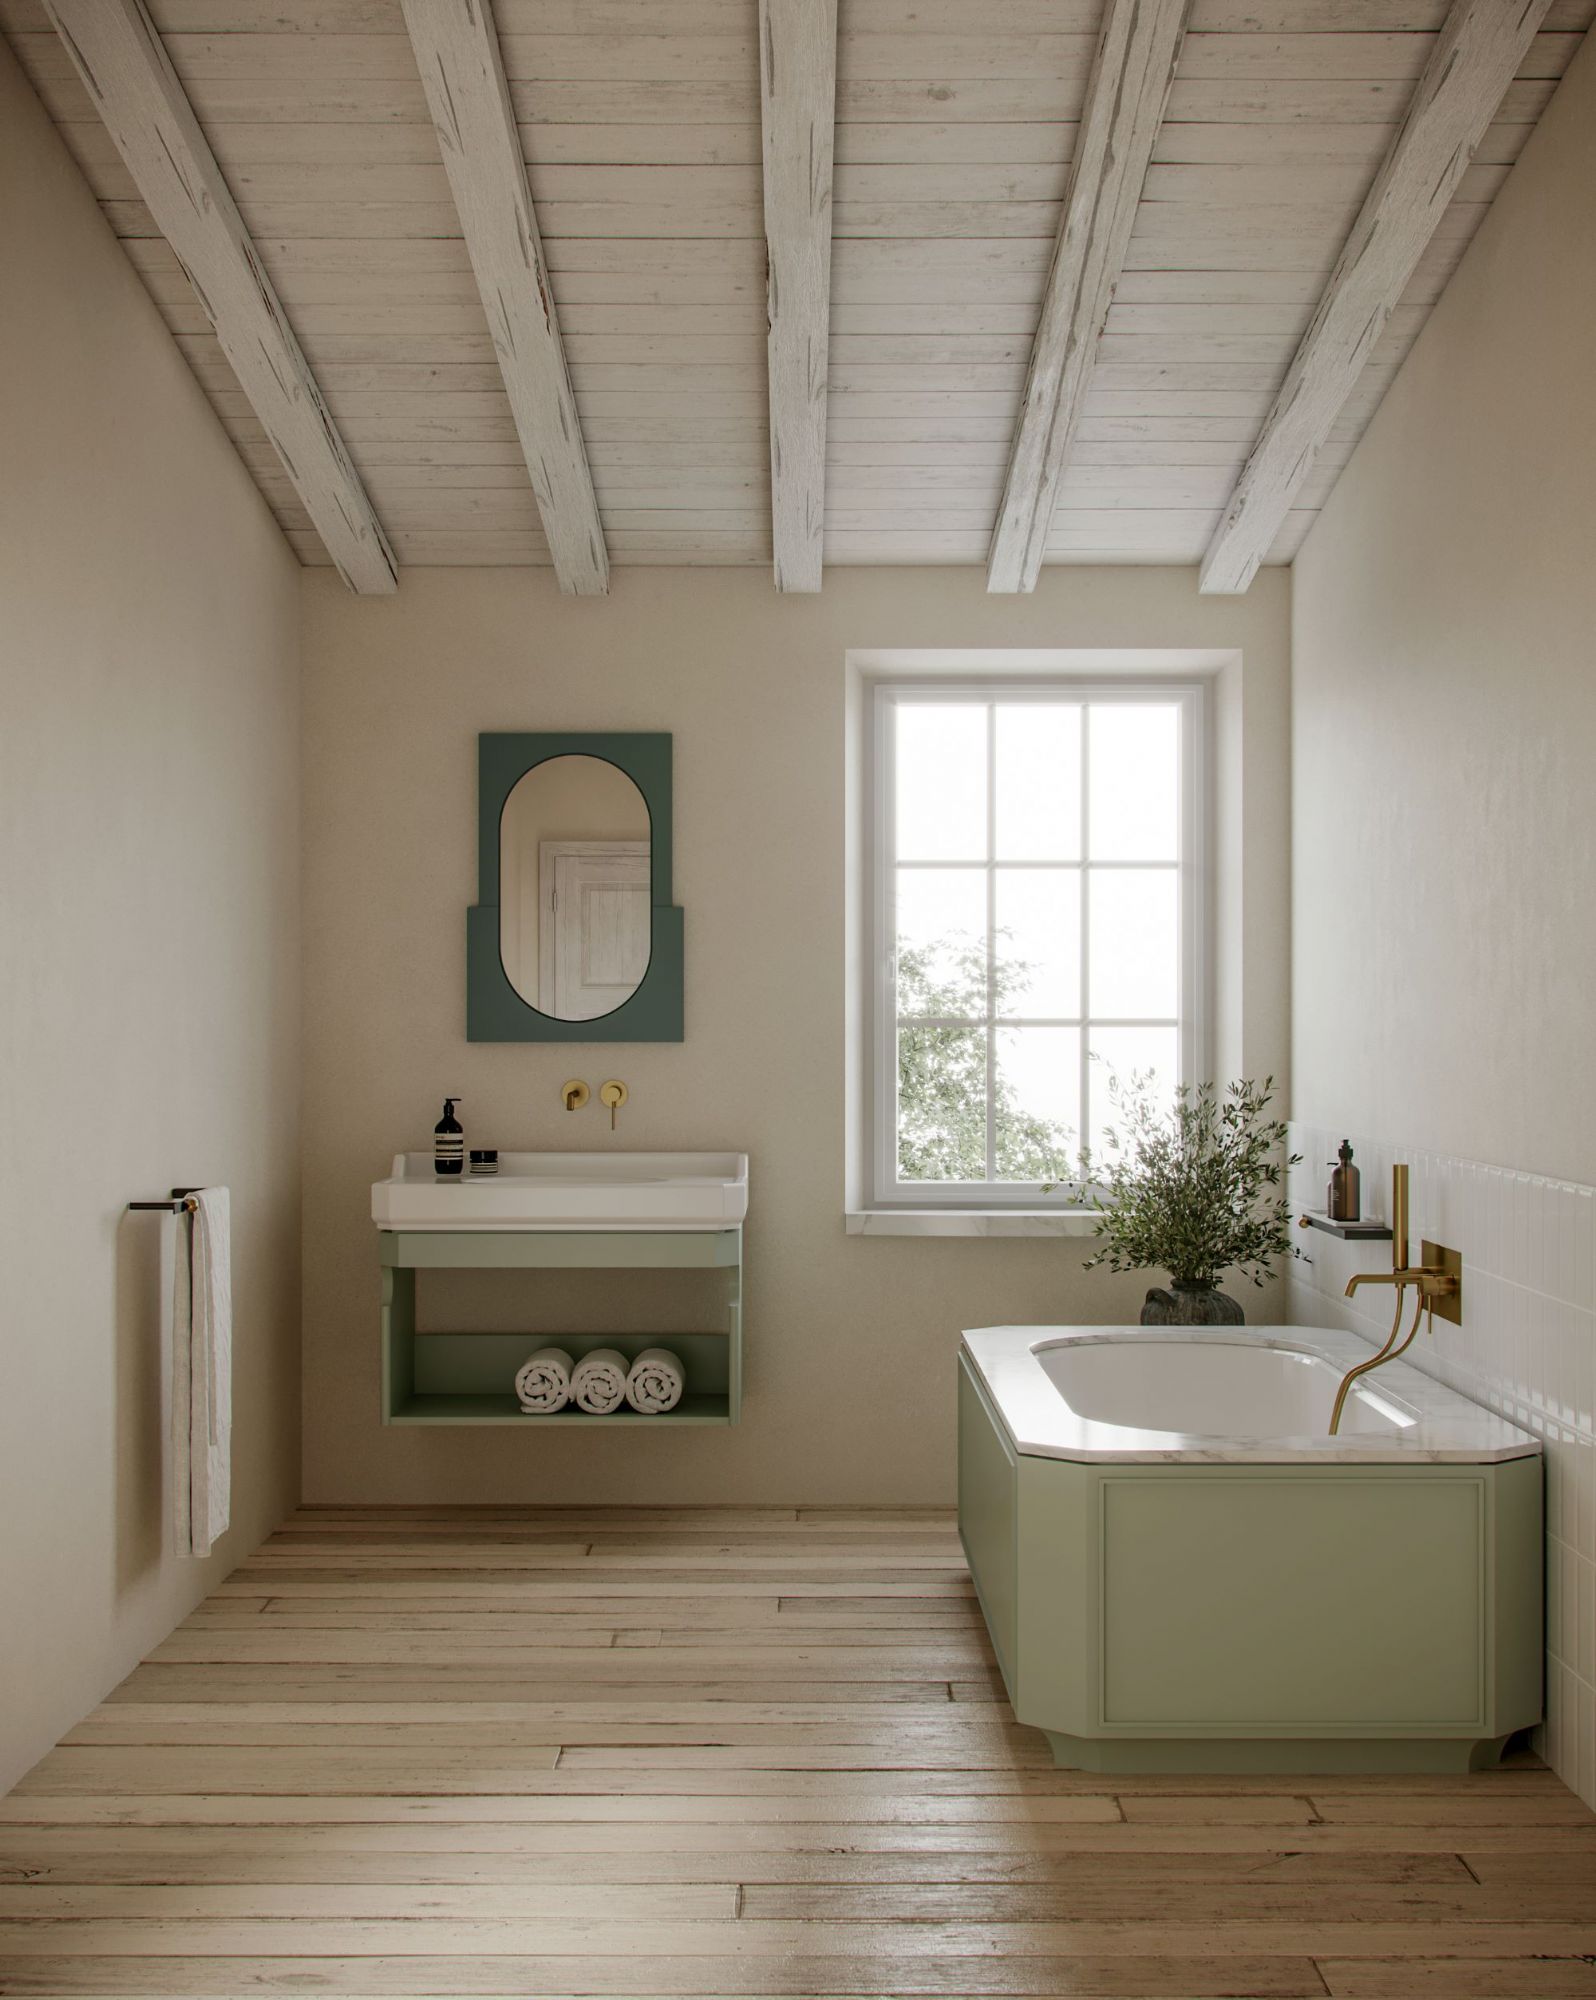 The Ex.t Nostalgia freestanding bath with solid white marble top.